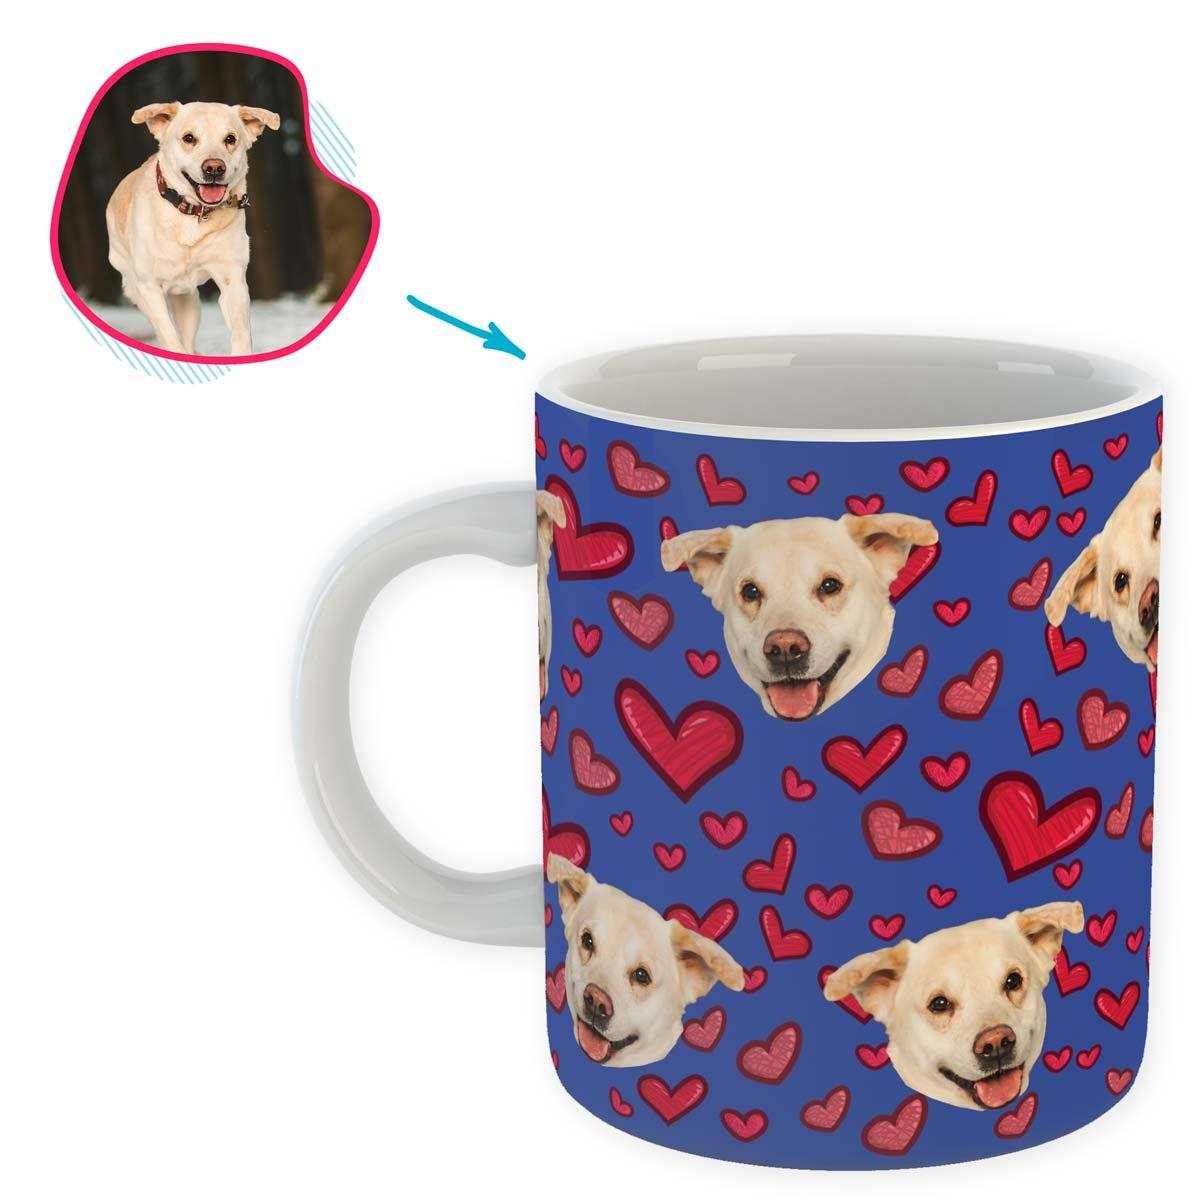 darkblue Heart mug personalized with photo of face printed on it